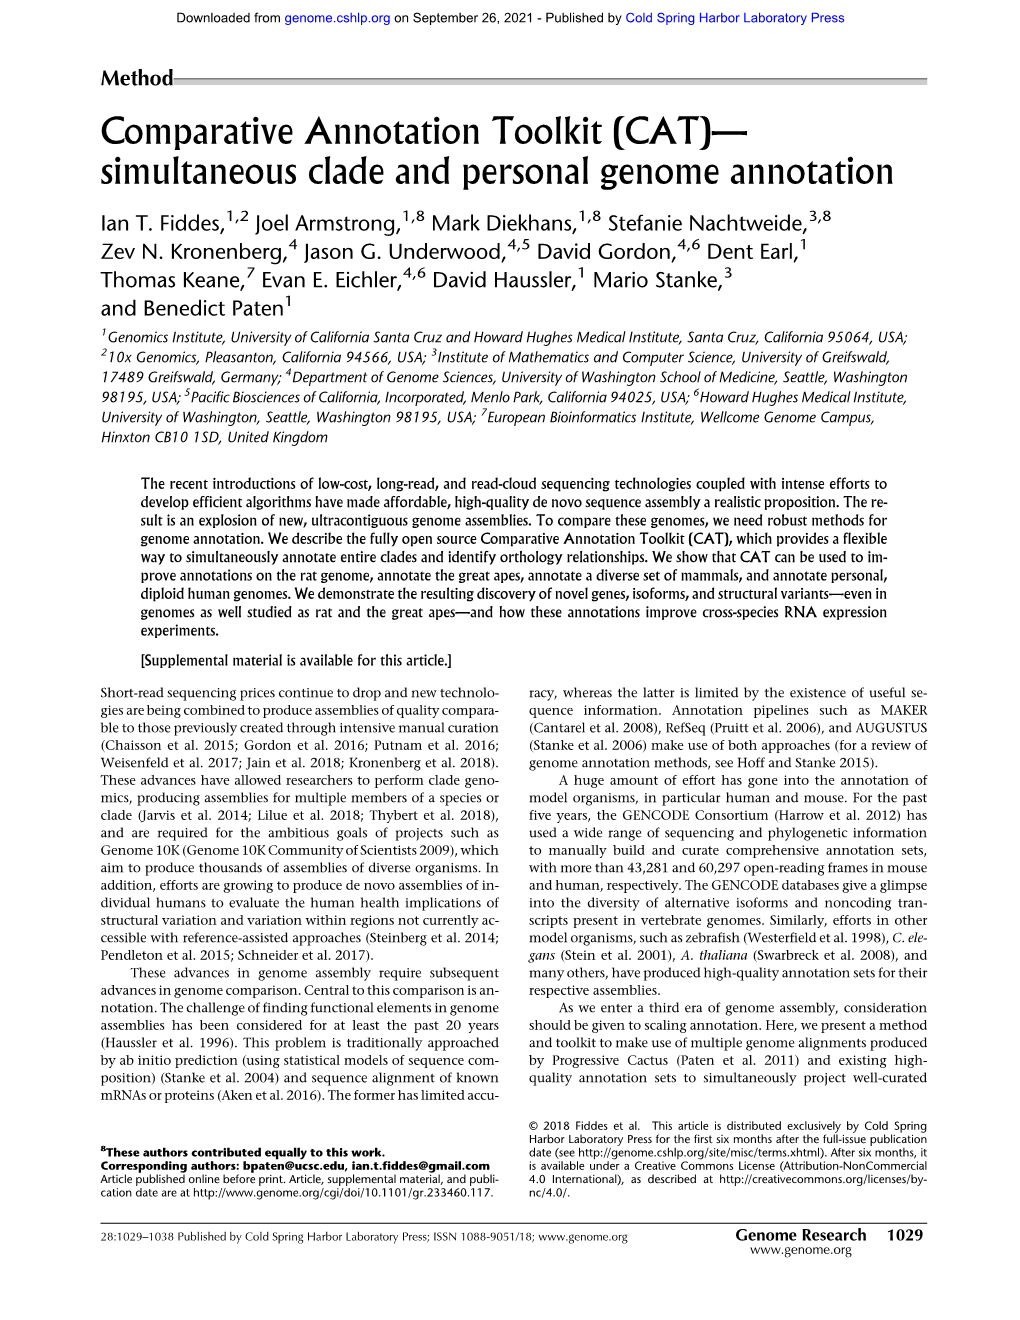 Comparative Annotation Toolkit (CAT)— Simultaneous Clade and Personal Genome Annotation